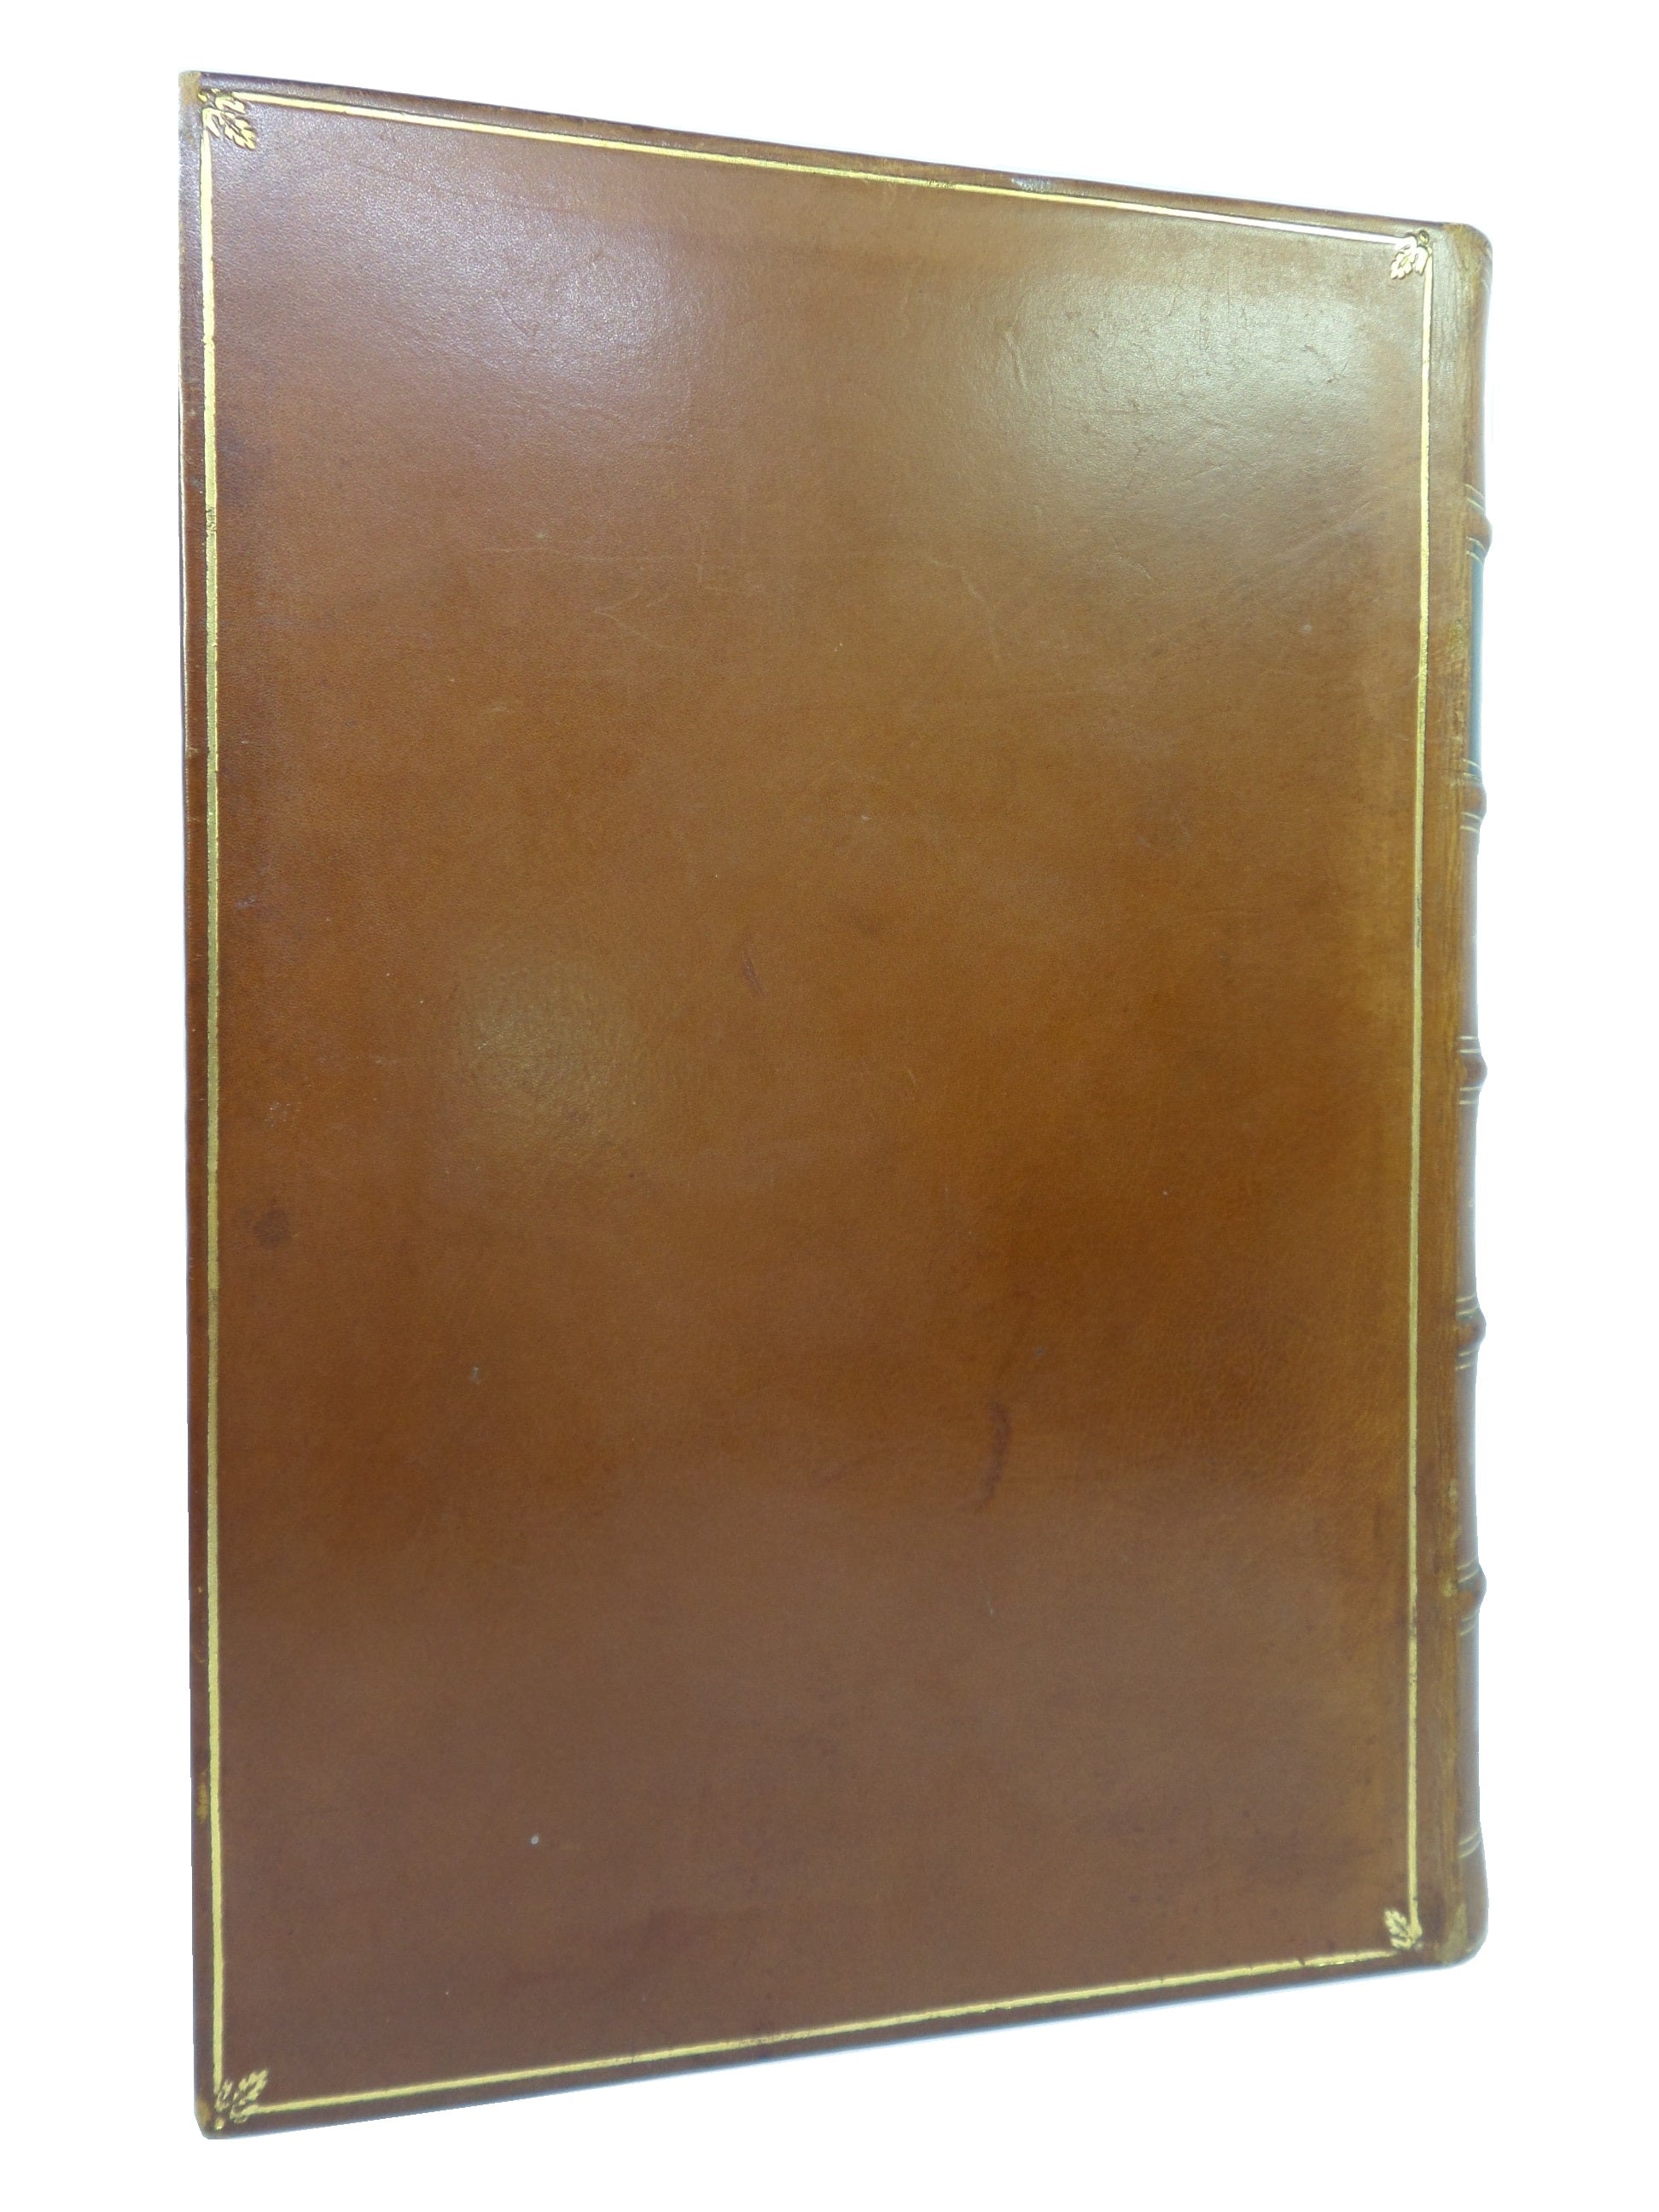 GEMS OF NATIONAL POETRY BY MRS VALENTINE 1890 FINE LEATHER BINDING